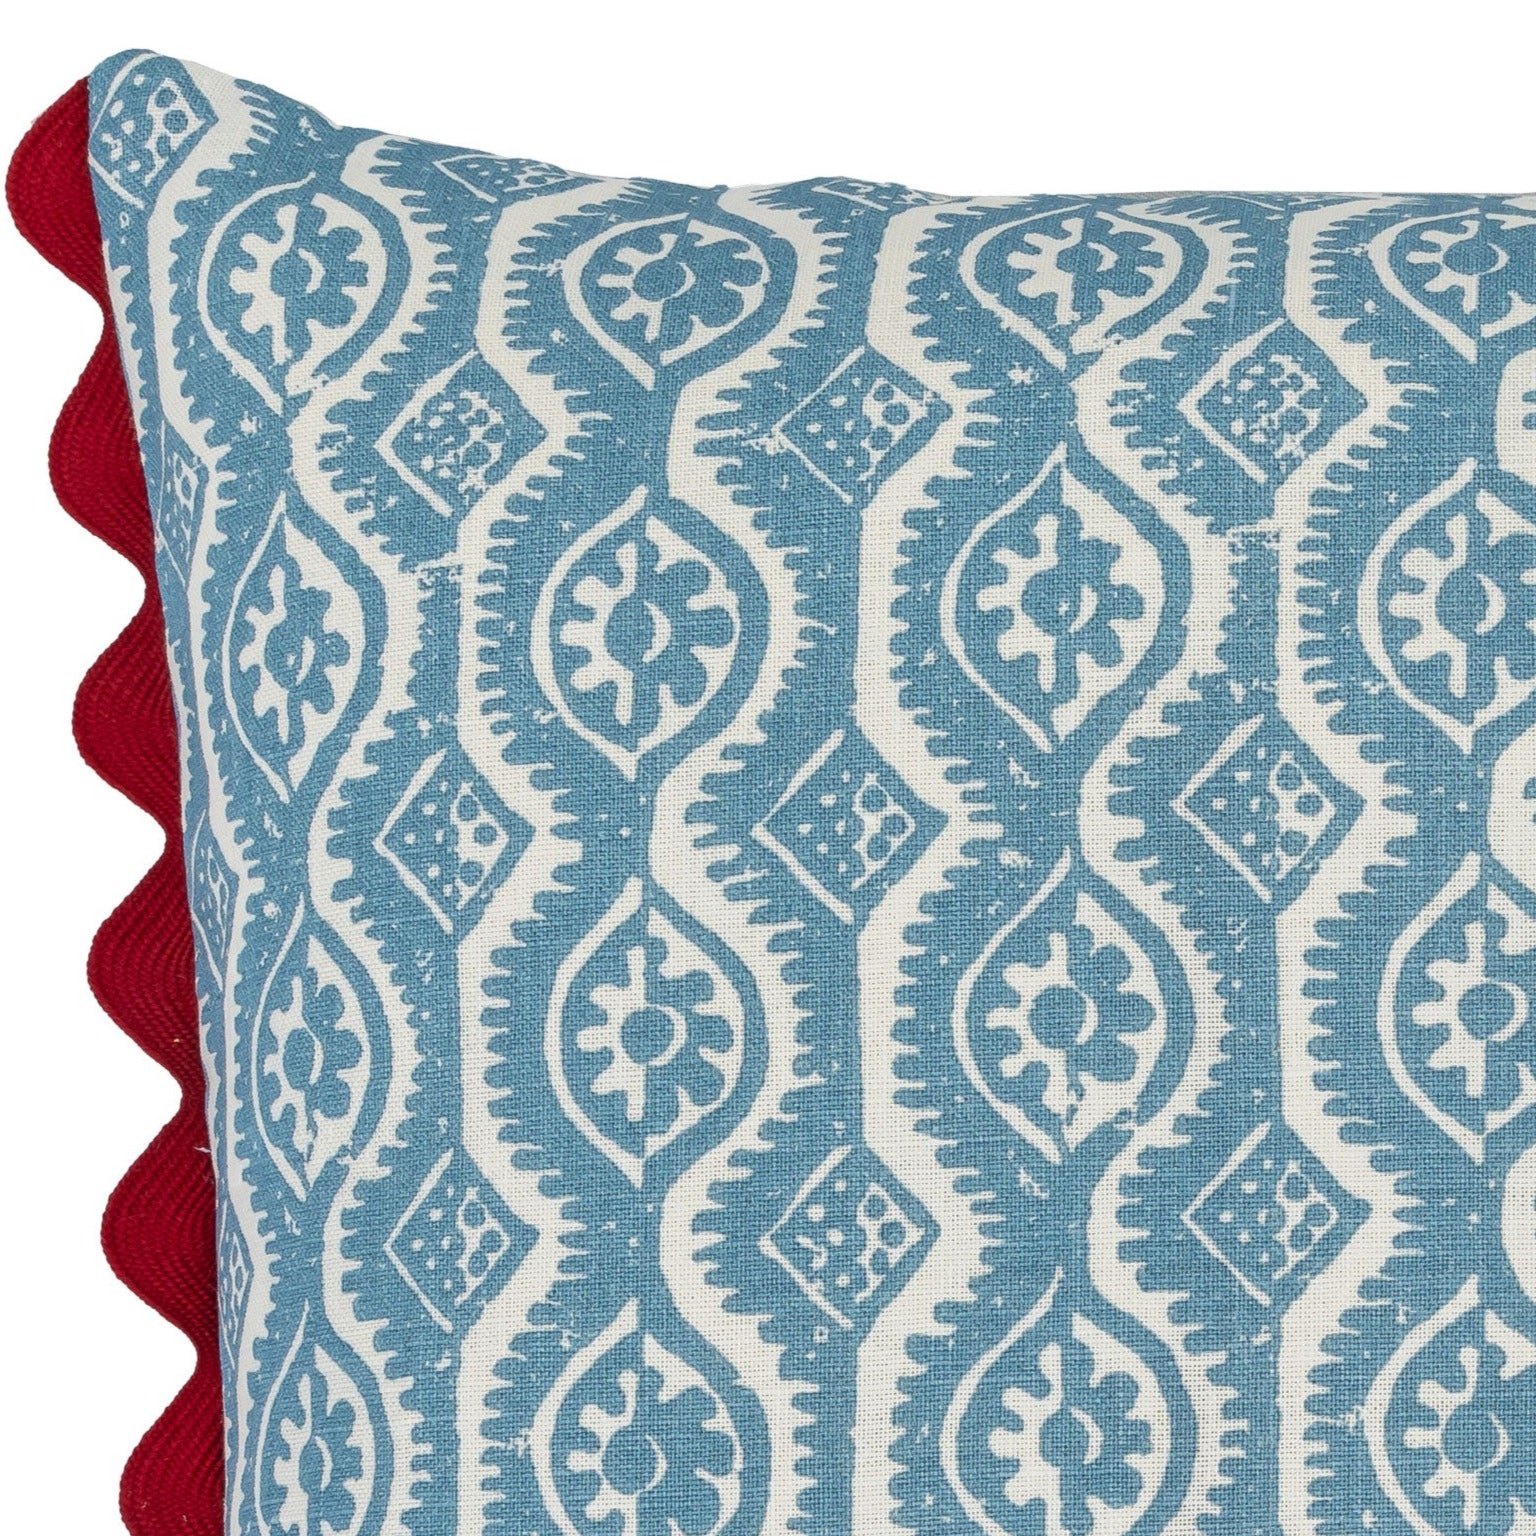 Wicklewood, Small Damask Cushion